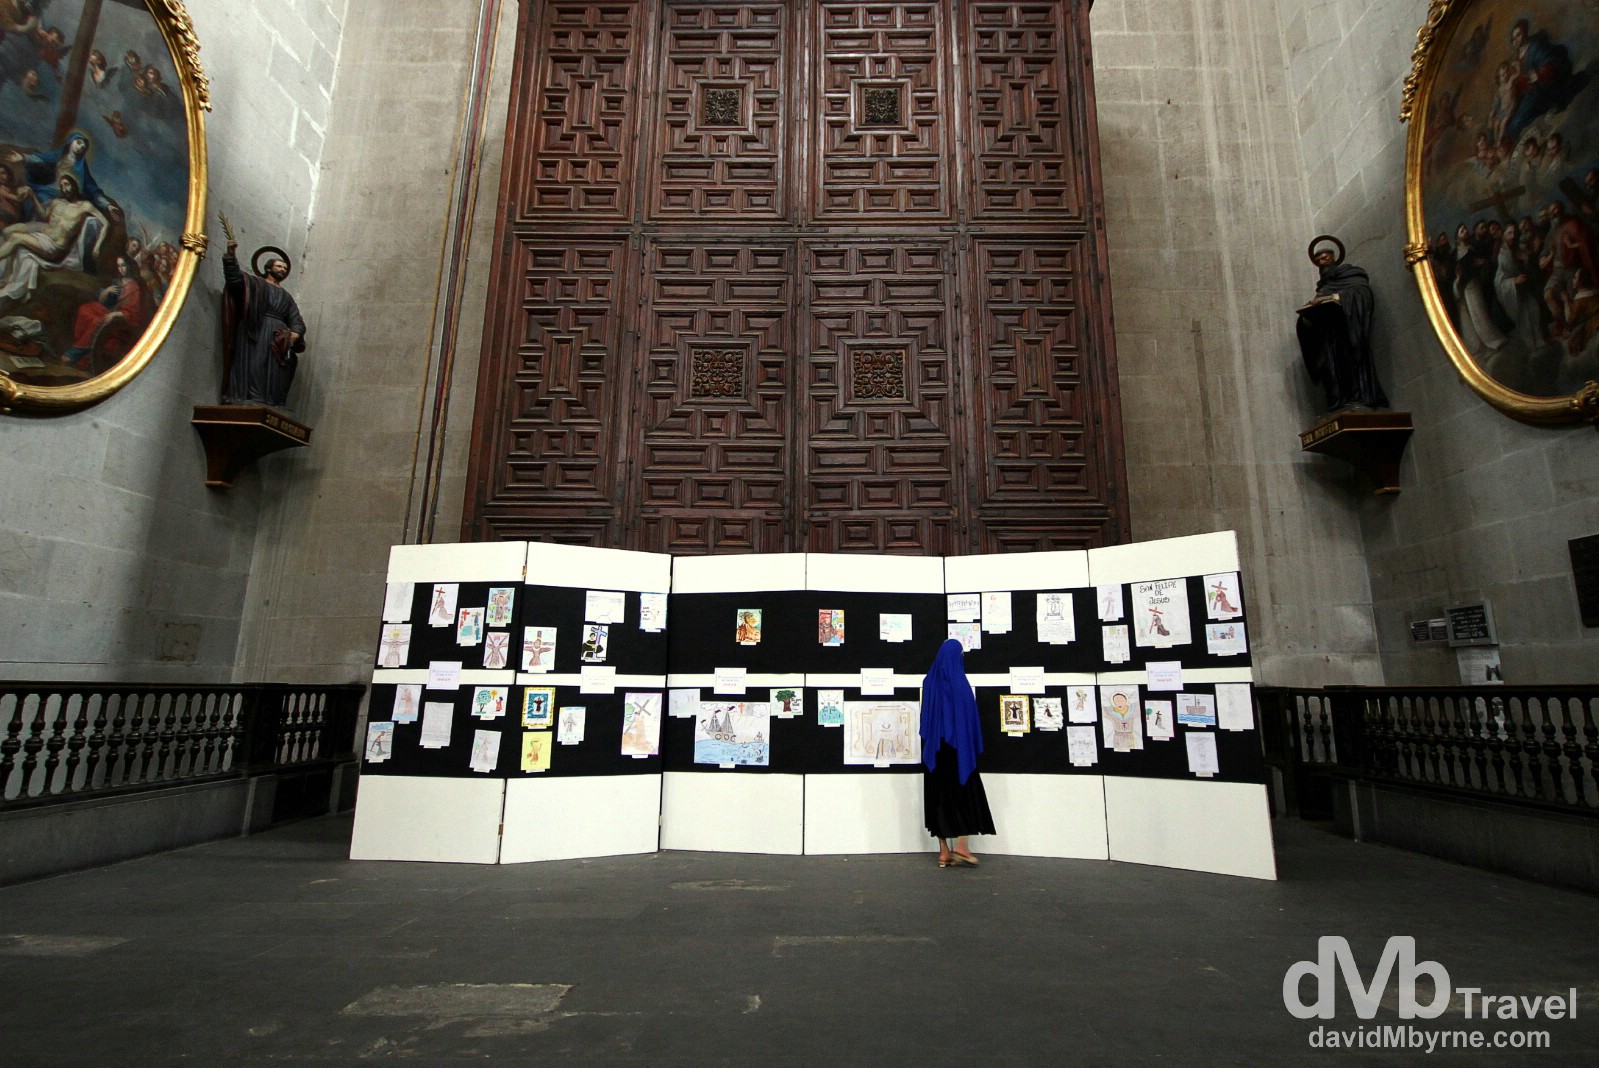 A nun looks at a display in a section of the Catedral Metropolitana, Mexico City. April 26th 2013.